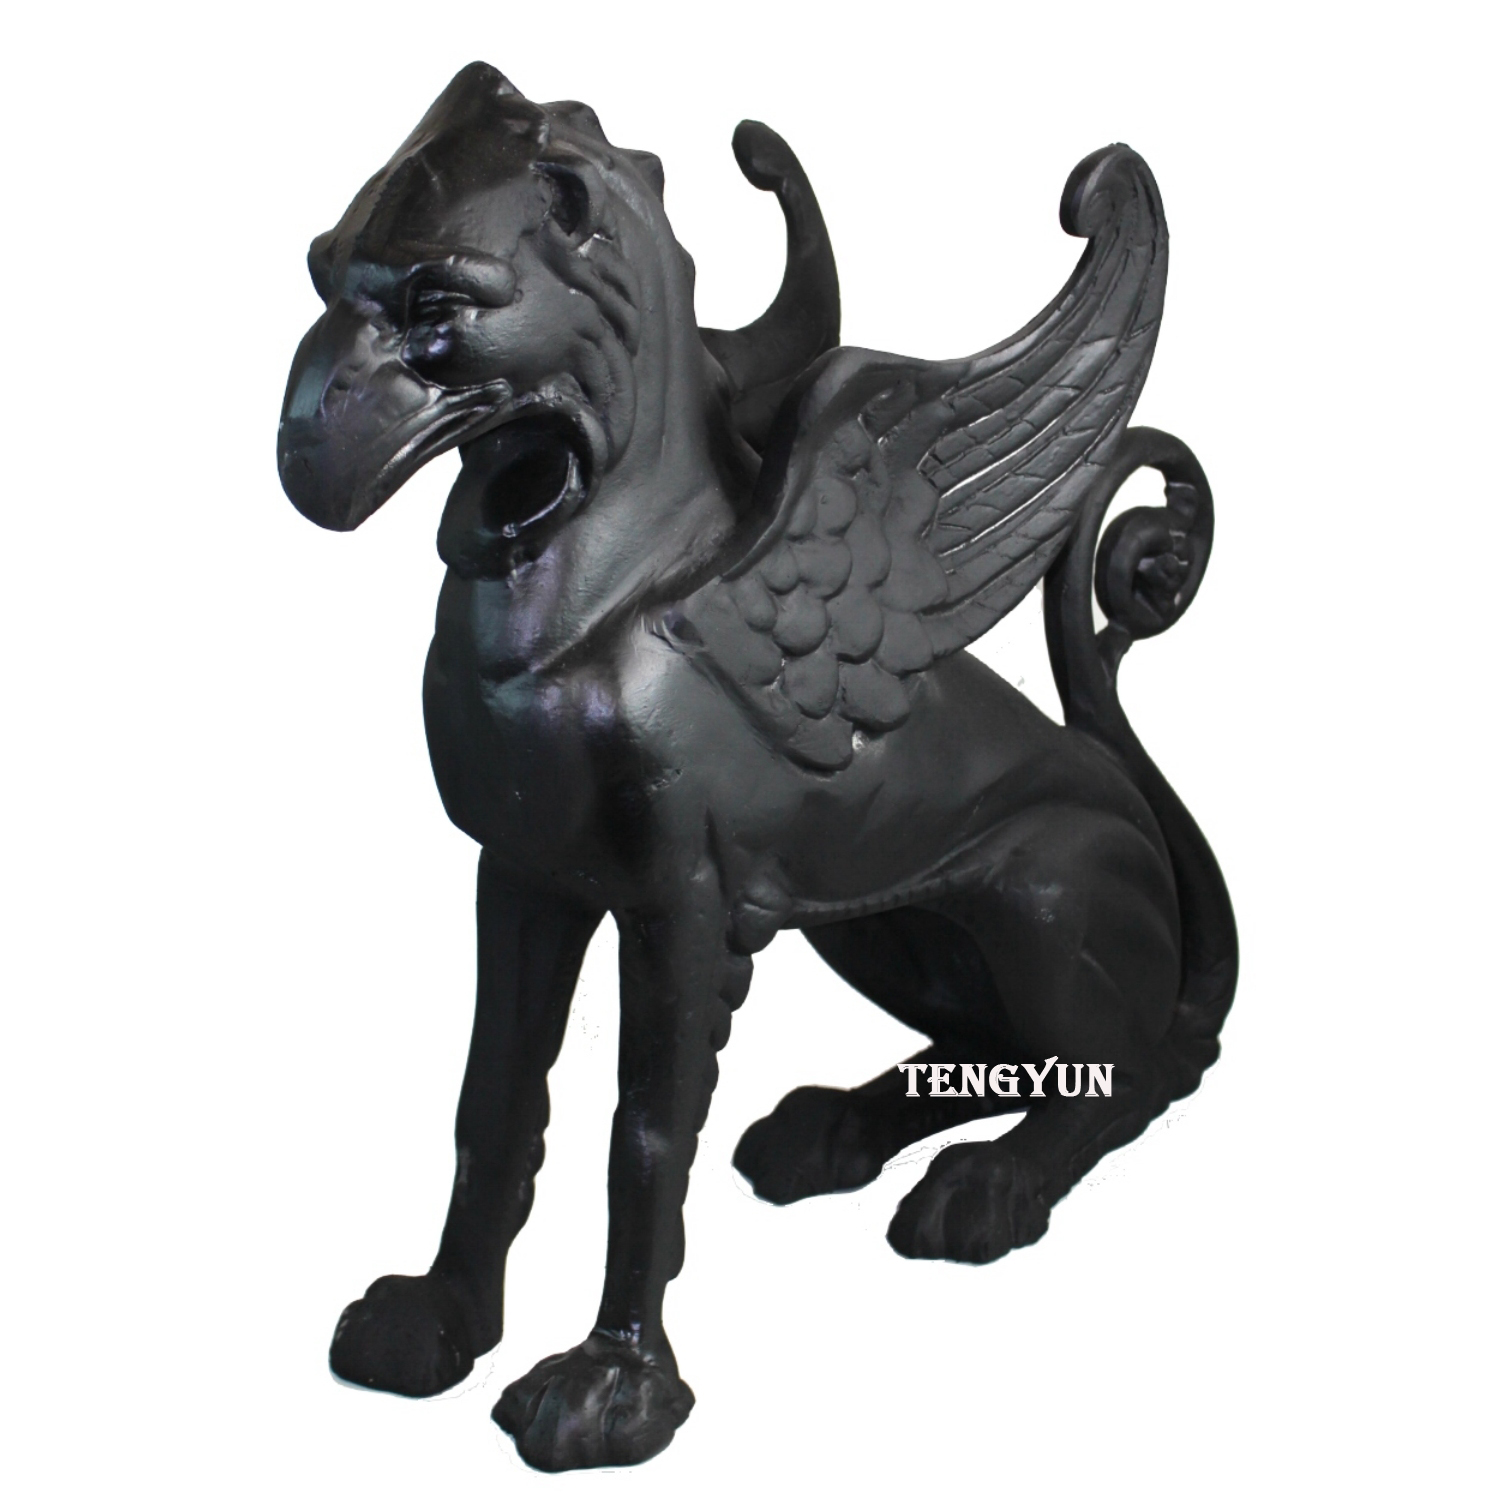 https://www.firststatue.com/outdoor-decor-mythical-animal-statues-life-size-bronze-gargoyle-griffin-sculpture-for-sale-product/